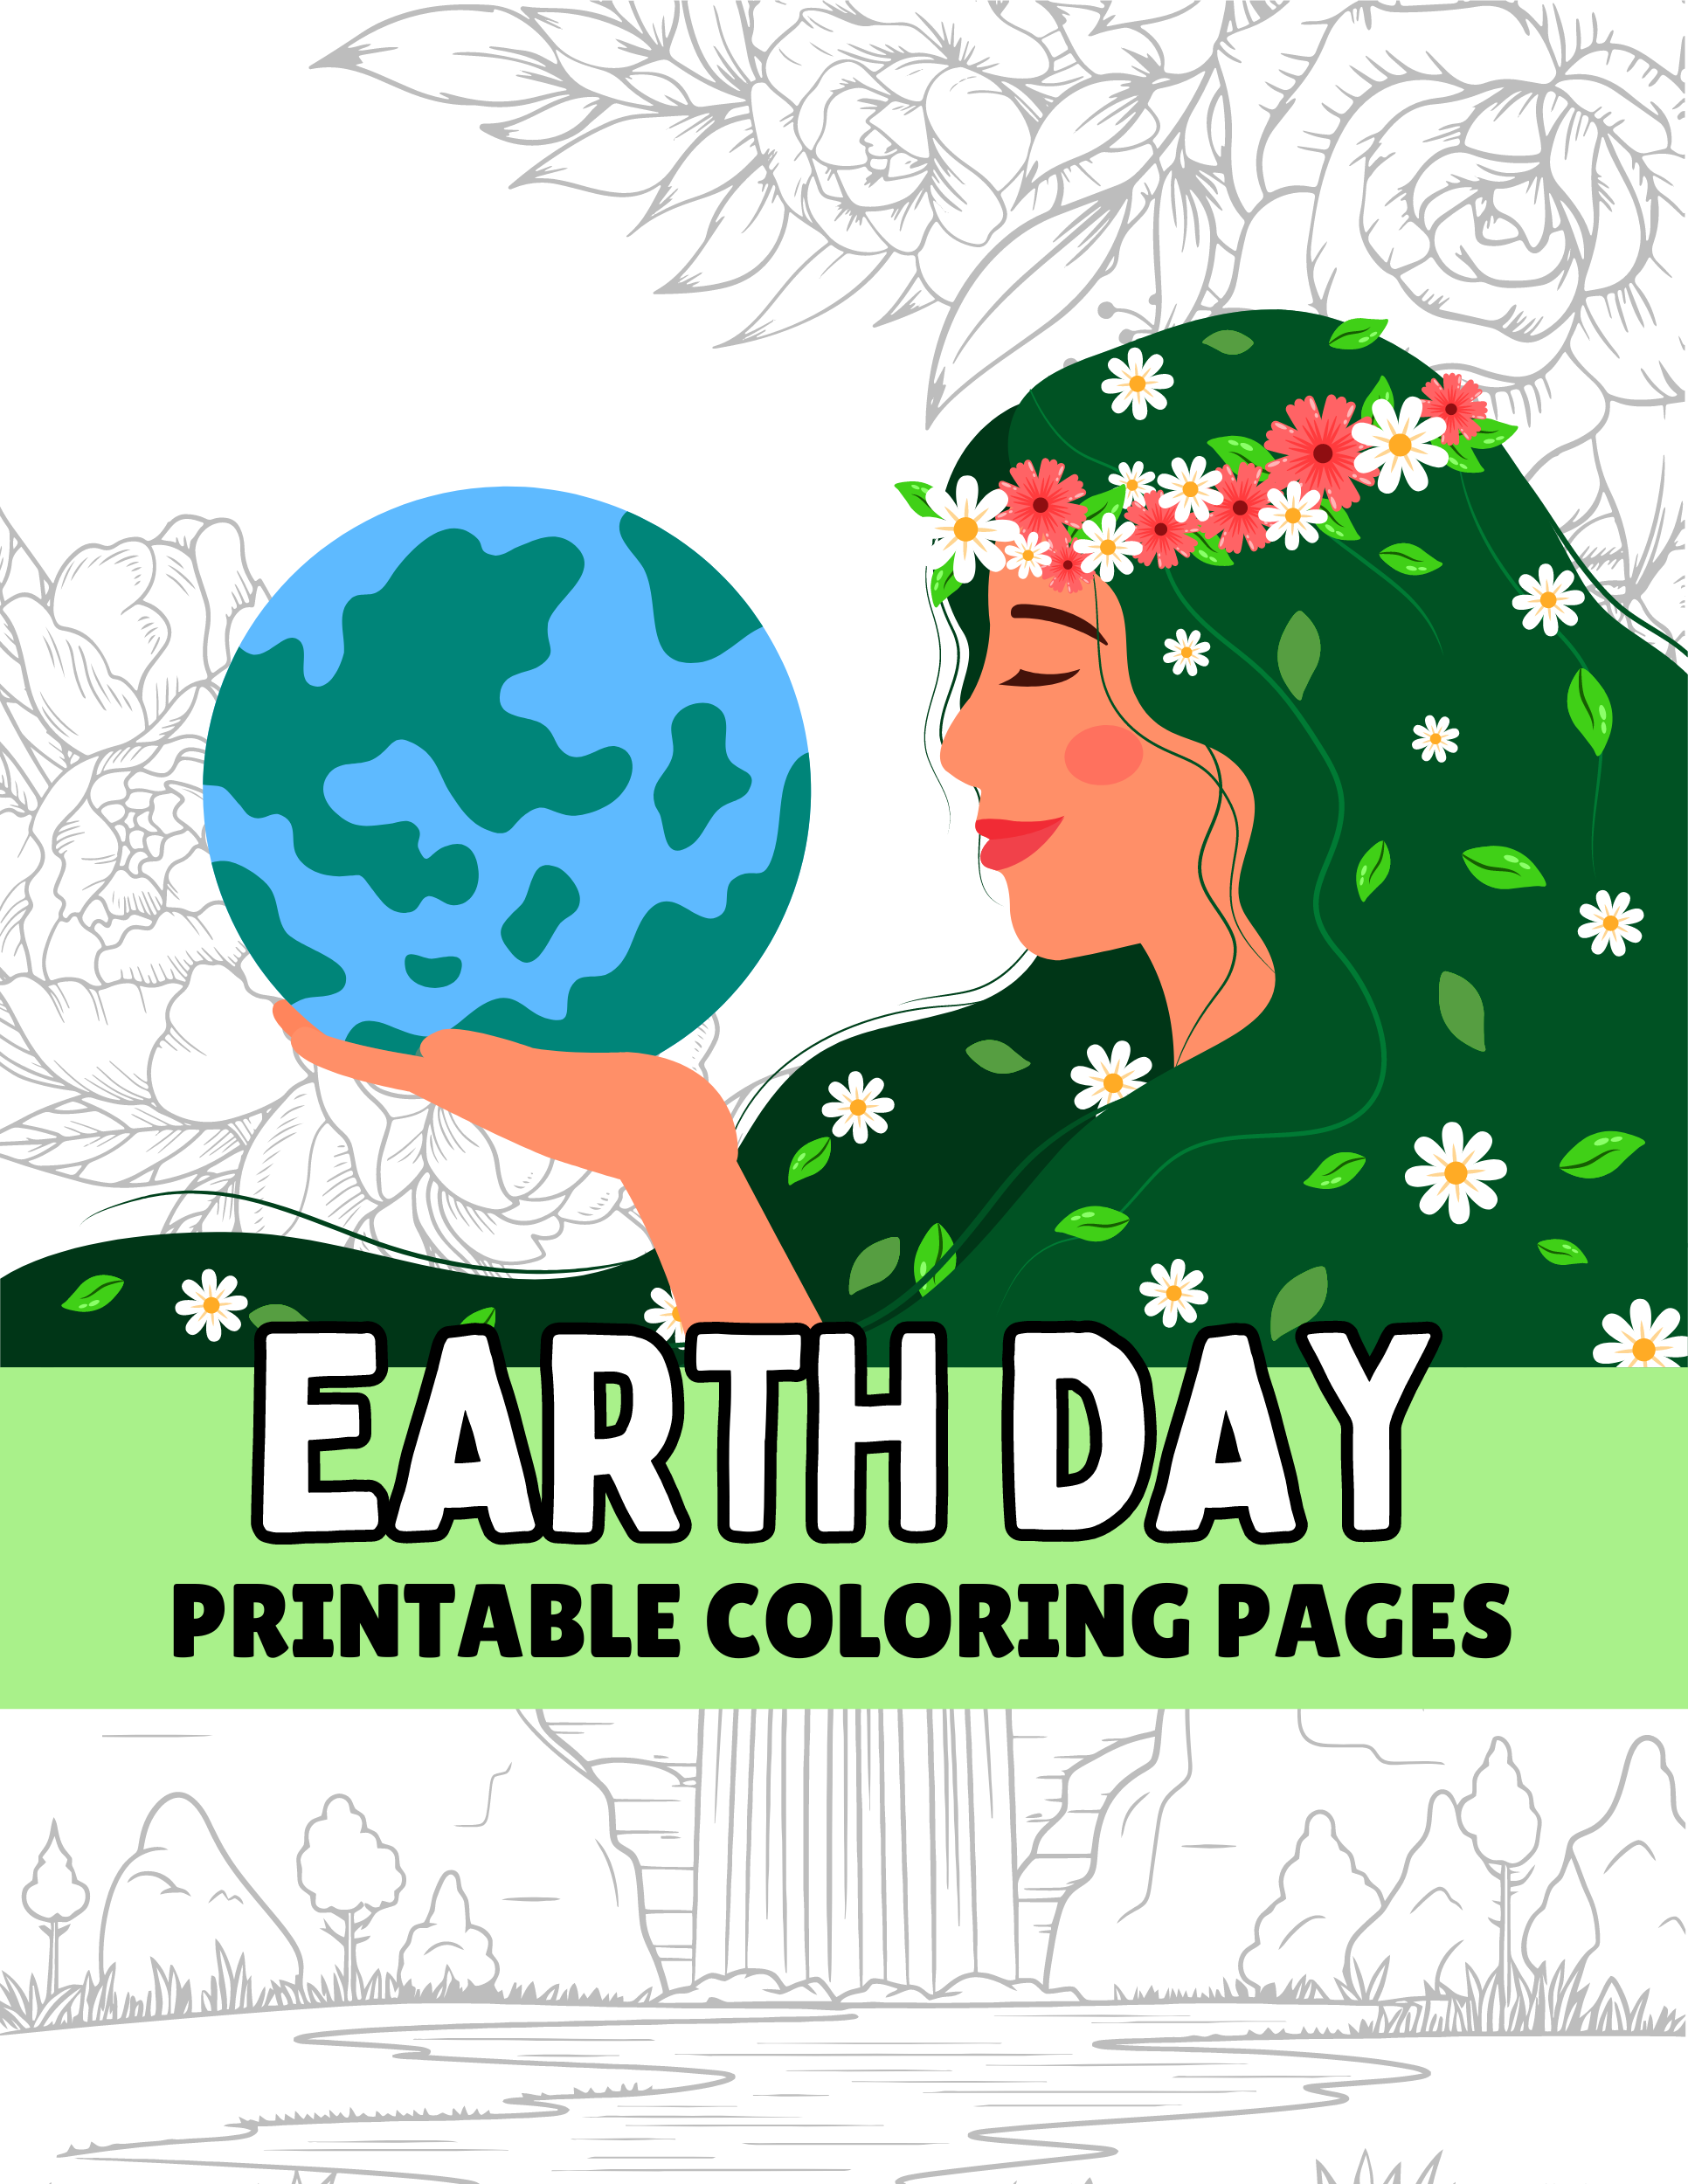 "Earth's Majesty" - Celebrate Earth Day with a Printable Digital Coloring Book of Global Landscapes